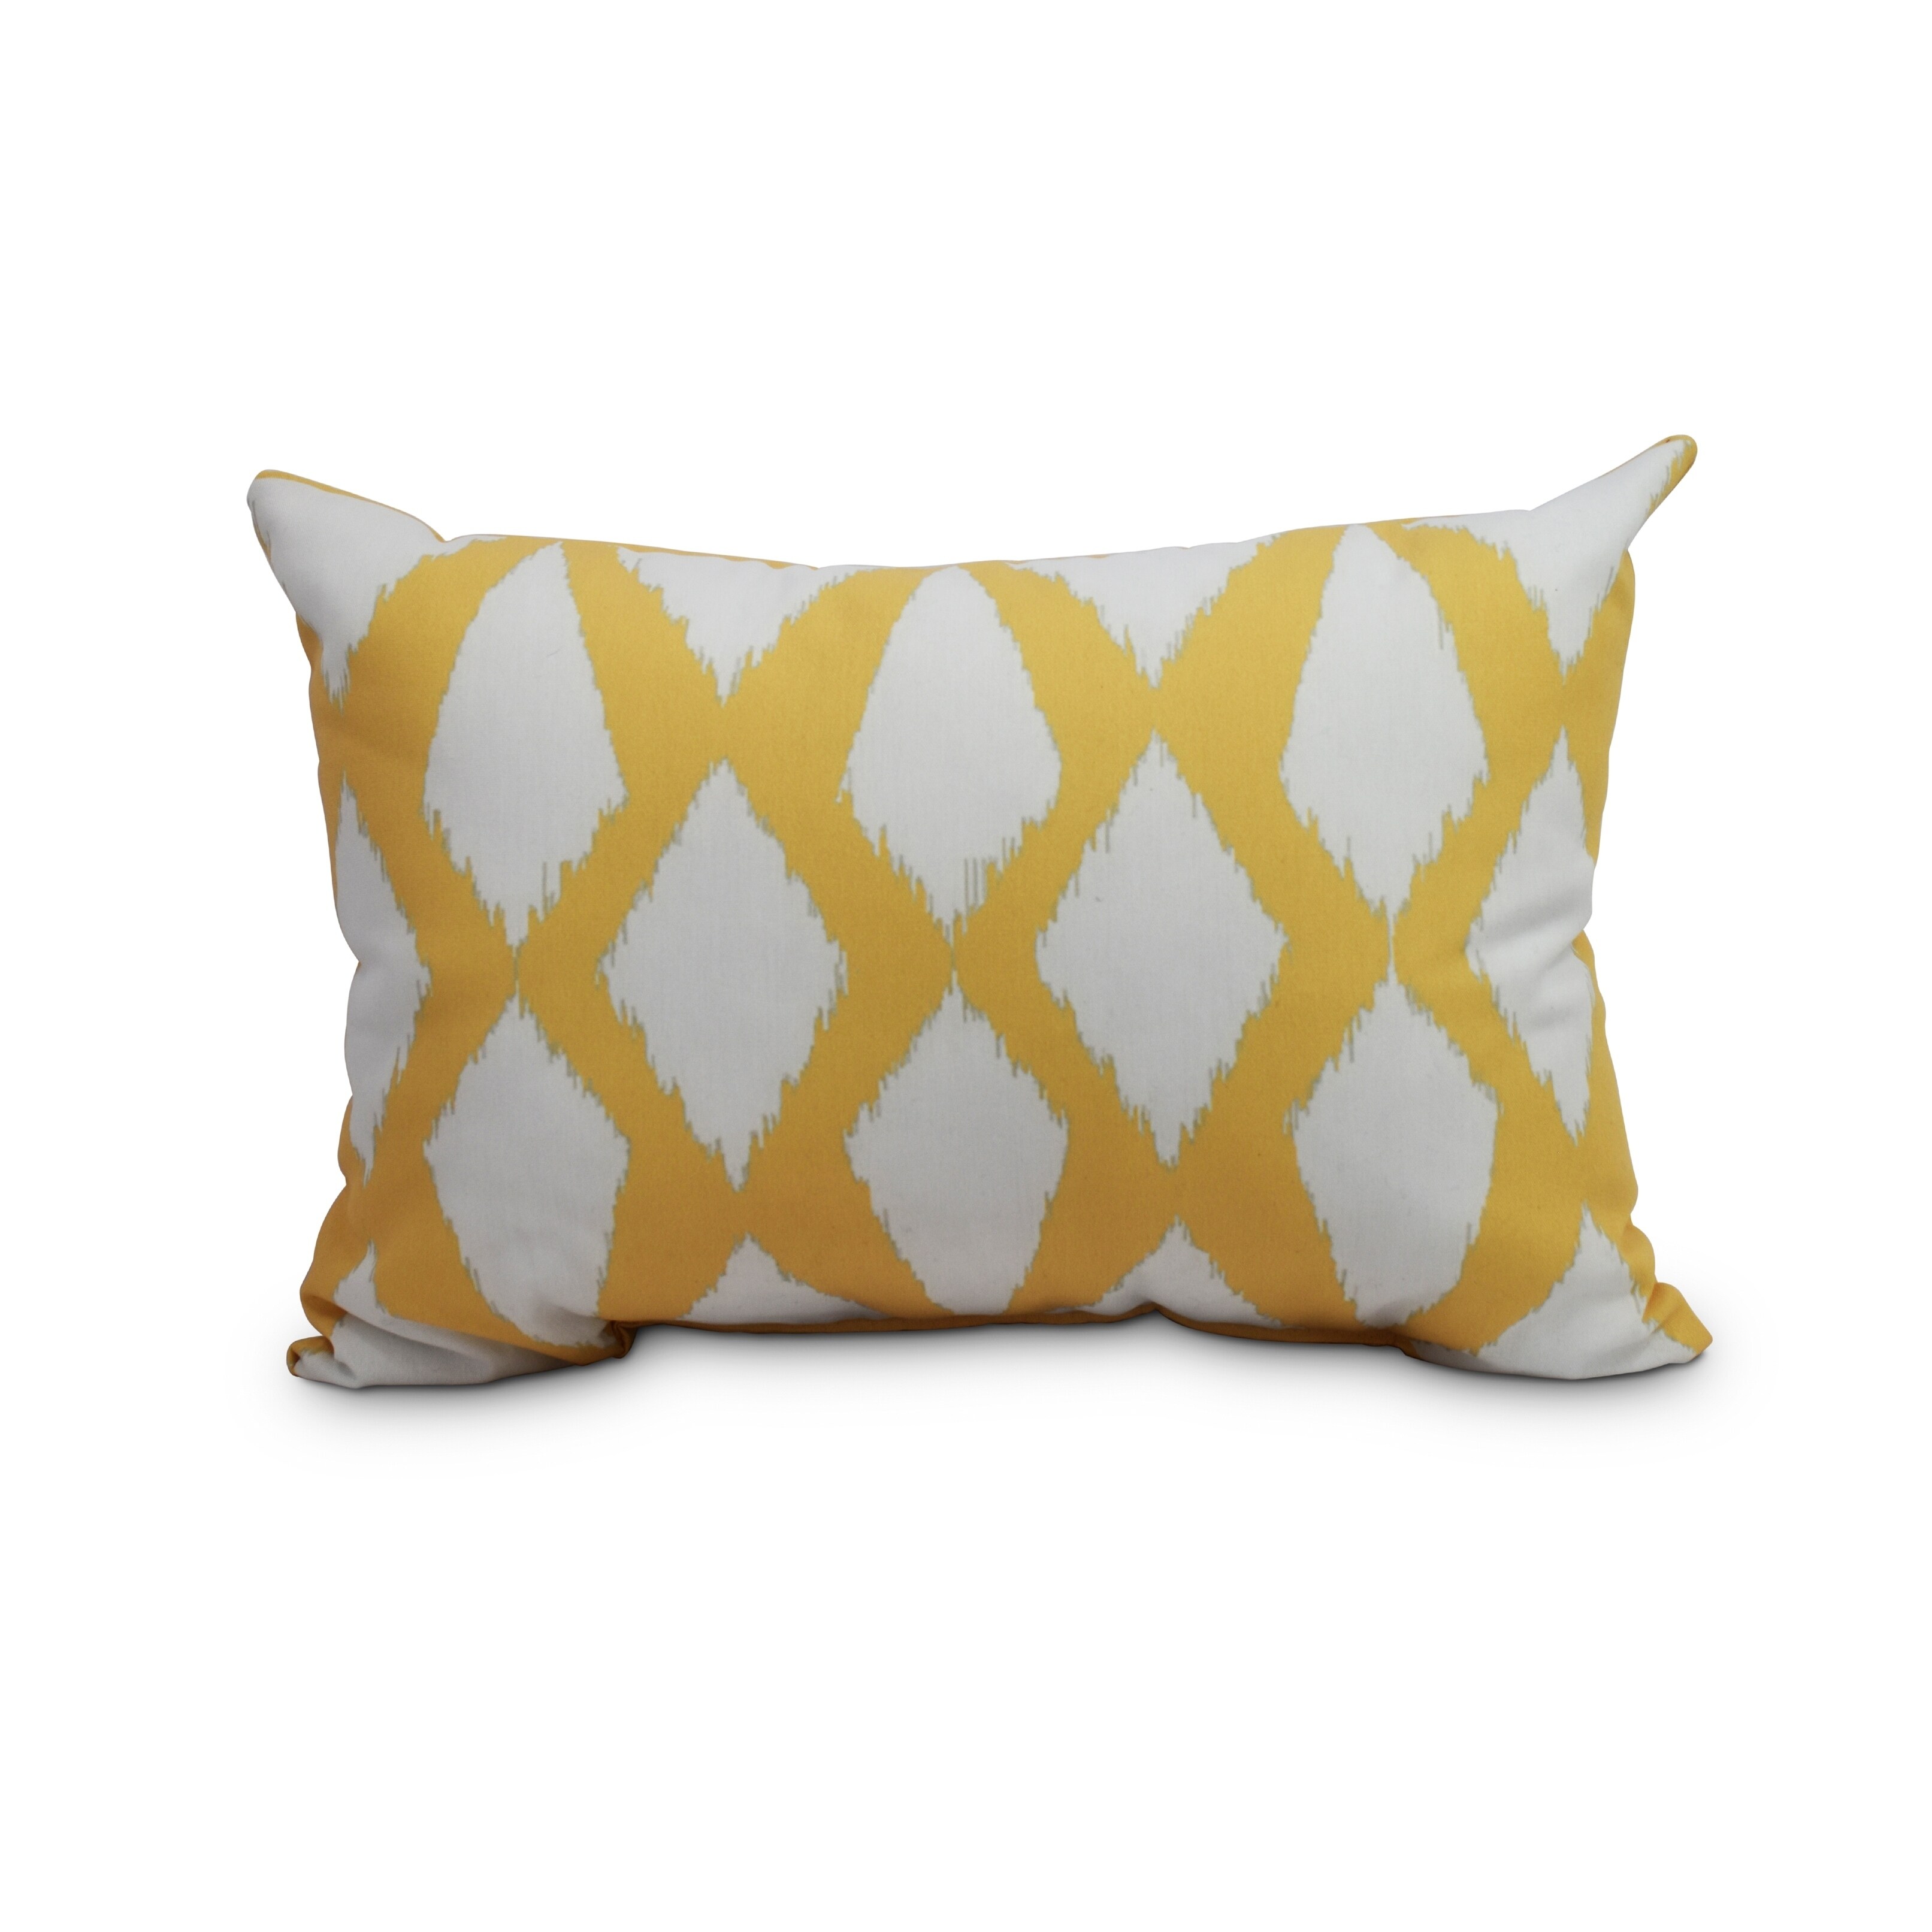 14 x 20 inch Yellow Decorative Abstract Outdoor Pillow